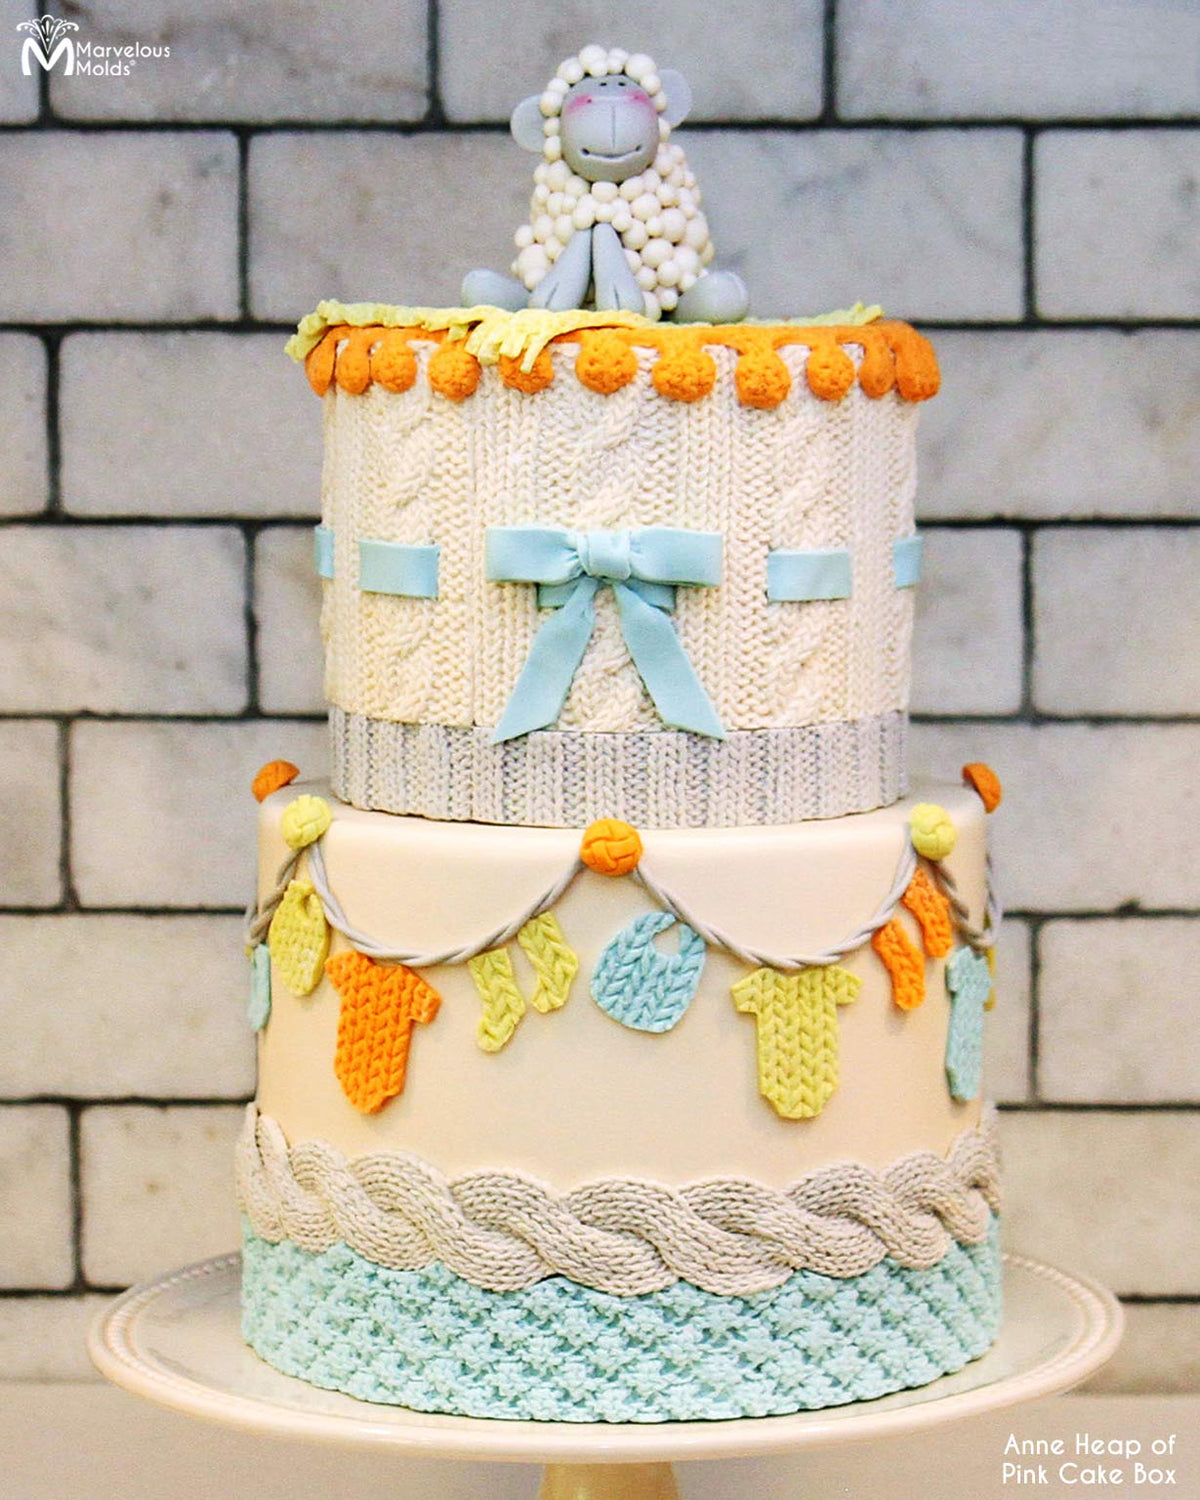 Baby Shower Cake Decorated with Knit Patterns, using Marvelous Molds Cable Knit Border Mold